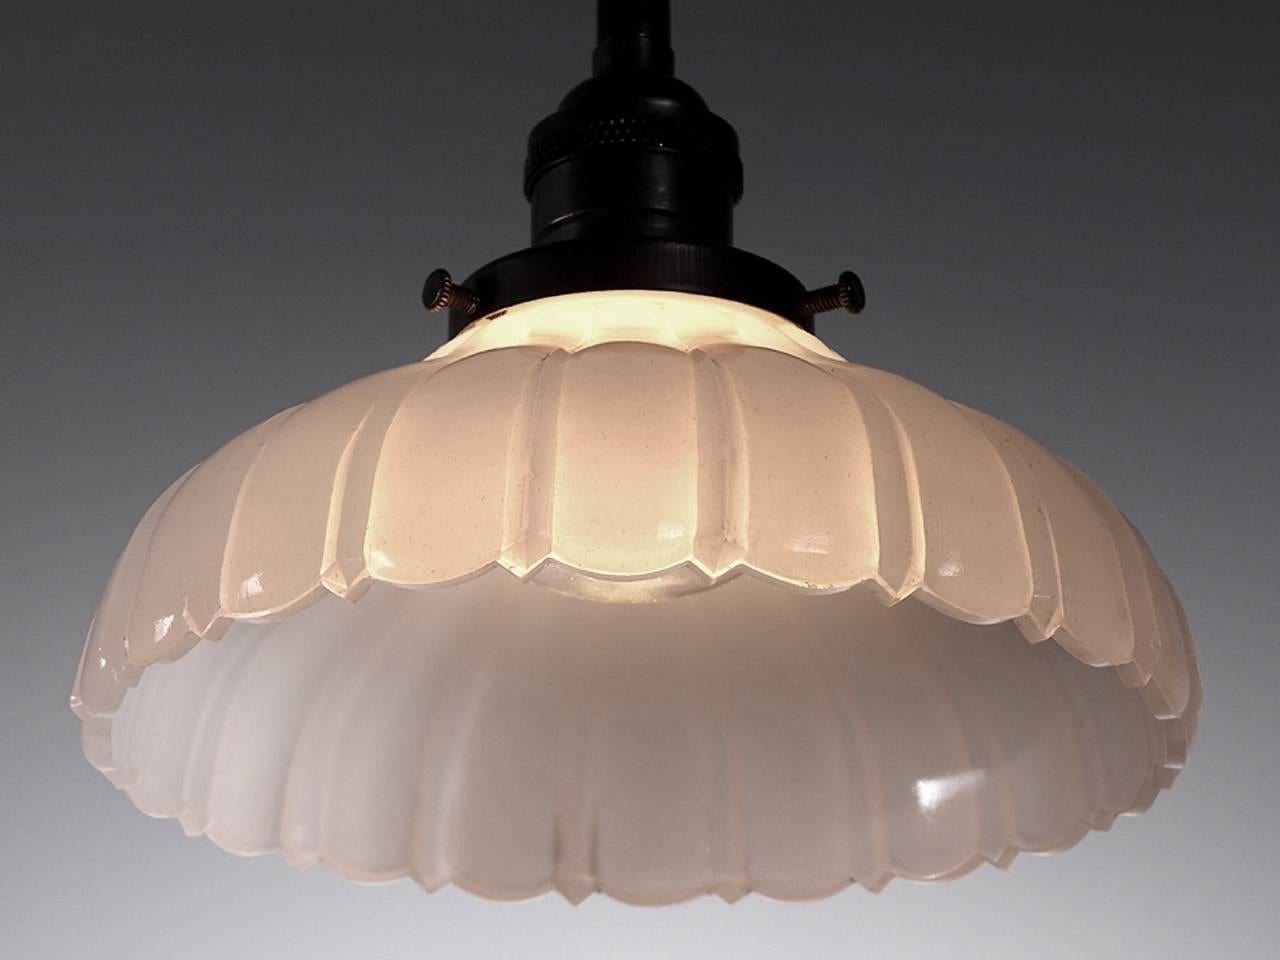 Softly curved bell shaped pendants are a Classic. They feel at home with any style decor. This example is an extra heavy thick-thin pattern in cast Clam Broth glass with a scalloped edge. The lamps are priced as a pair.